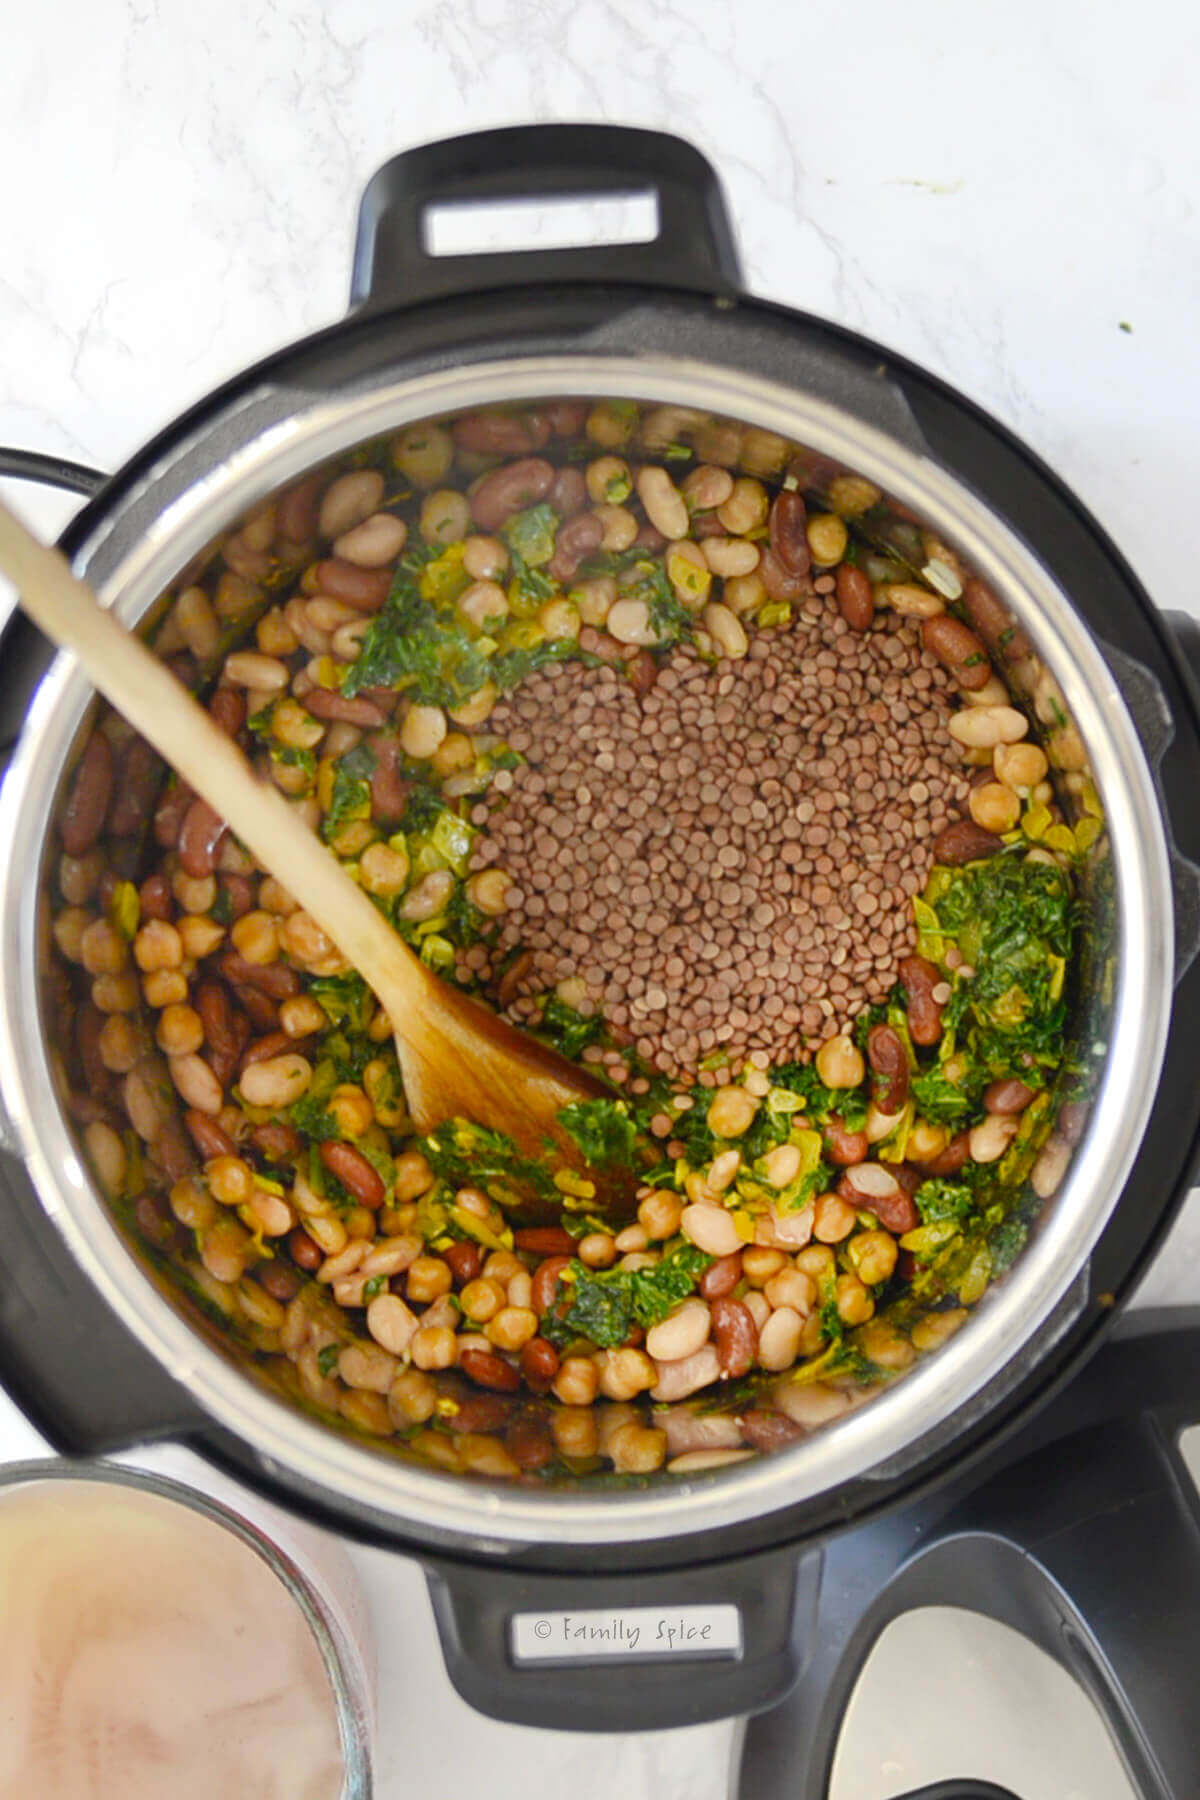 Adding dried lentils to bean mixture in the instant pot